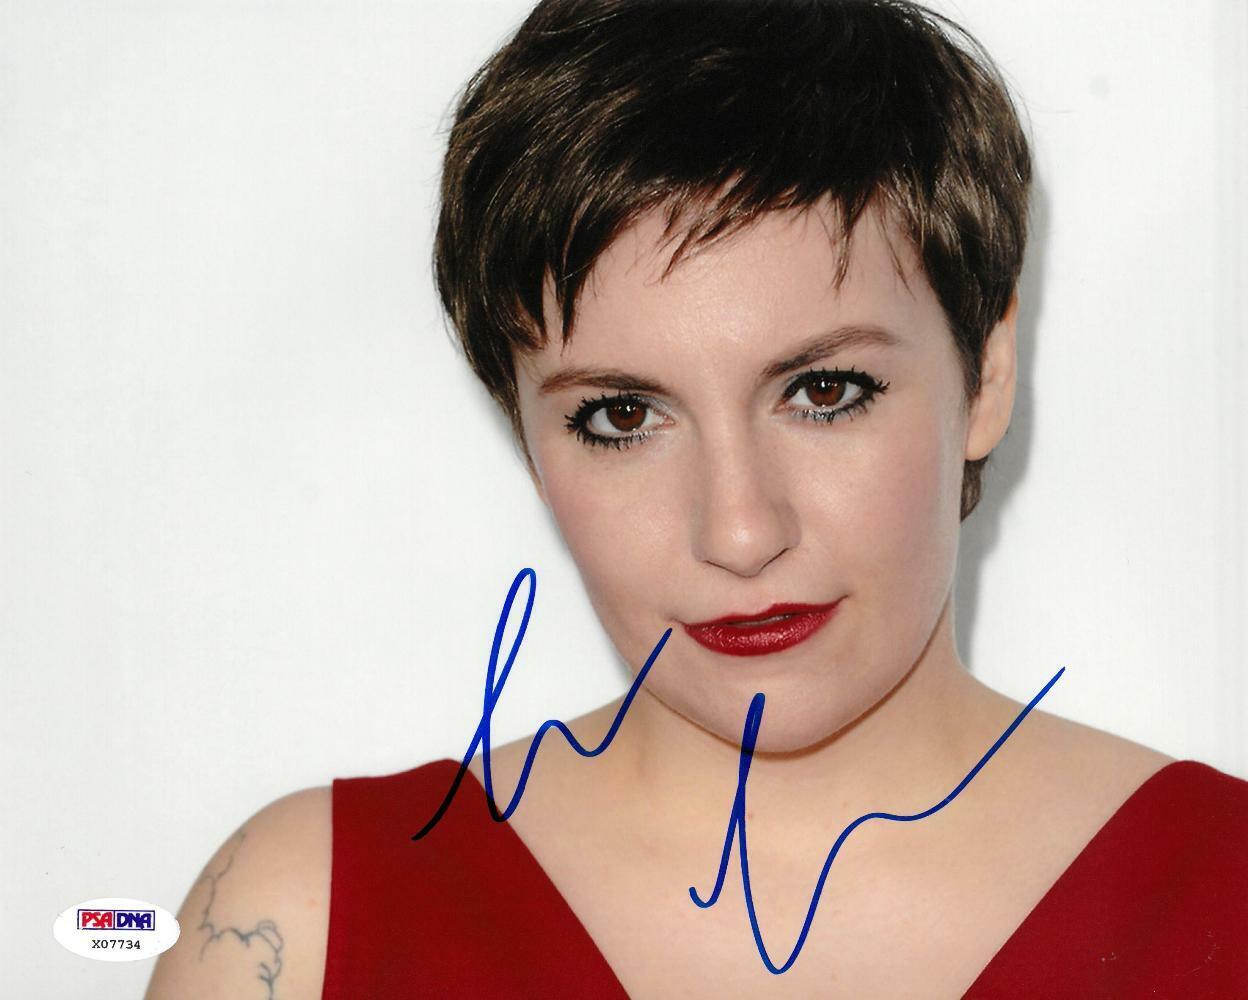 Lena Dunham Signed Authentic Autographed 8x10 Photo Poster painting PSA/DNA #X07734